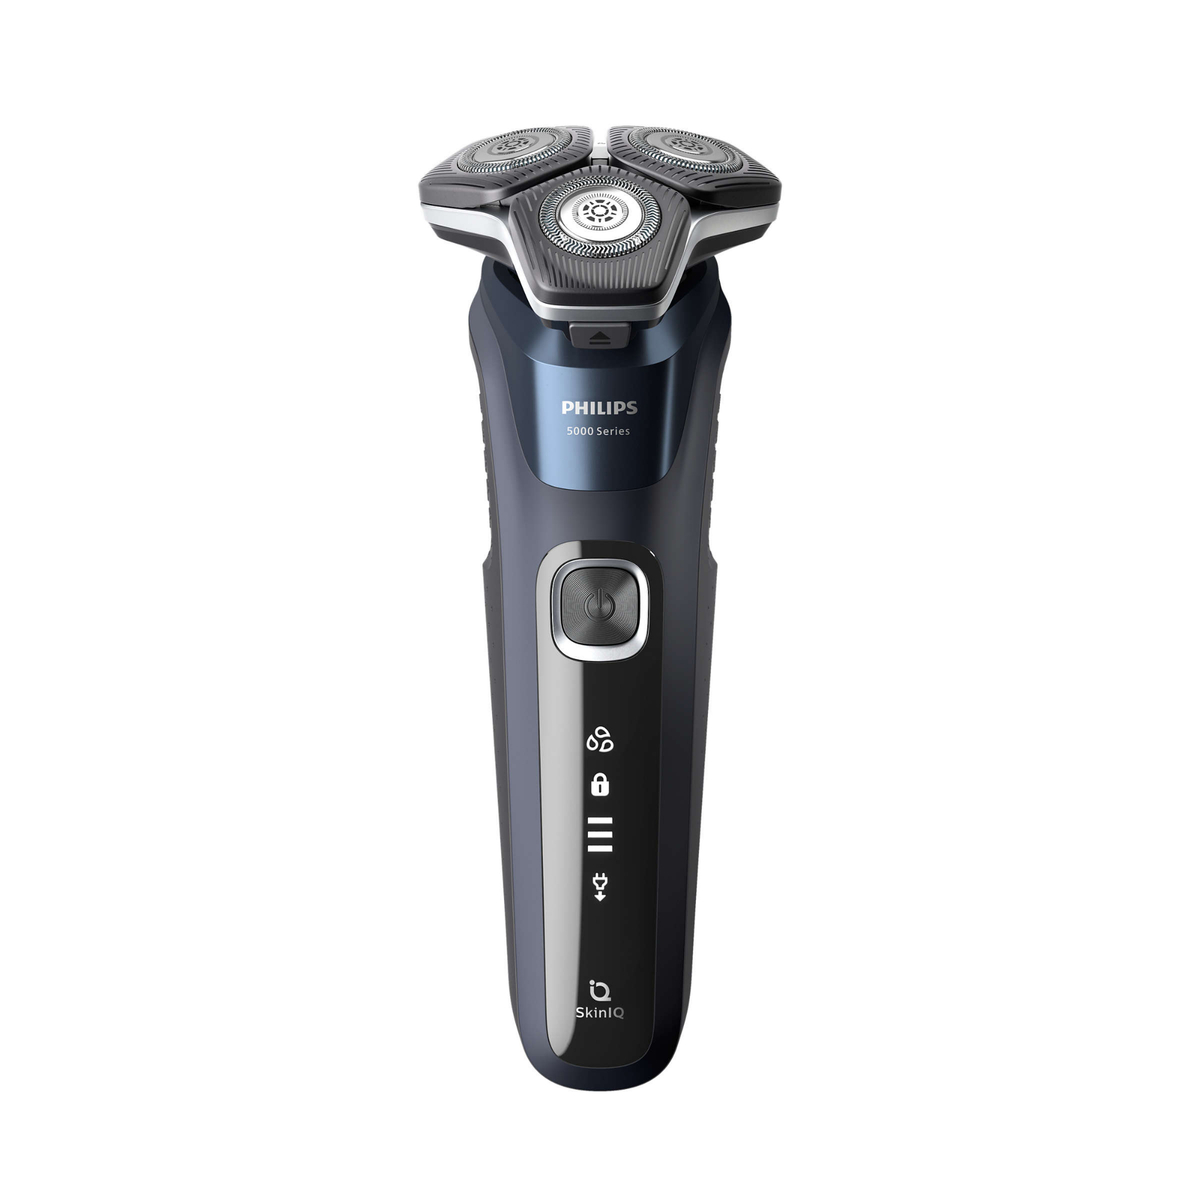 Philips 5000 Series Wet and Dry Electric Shaver, S5885/10